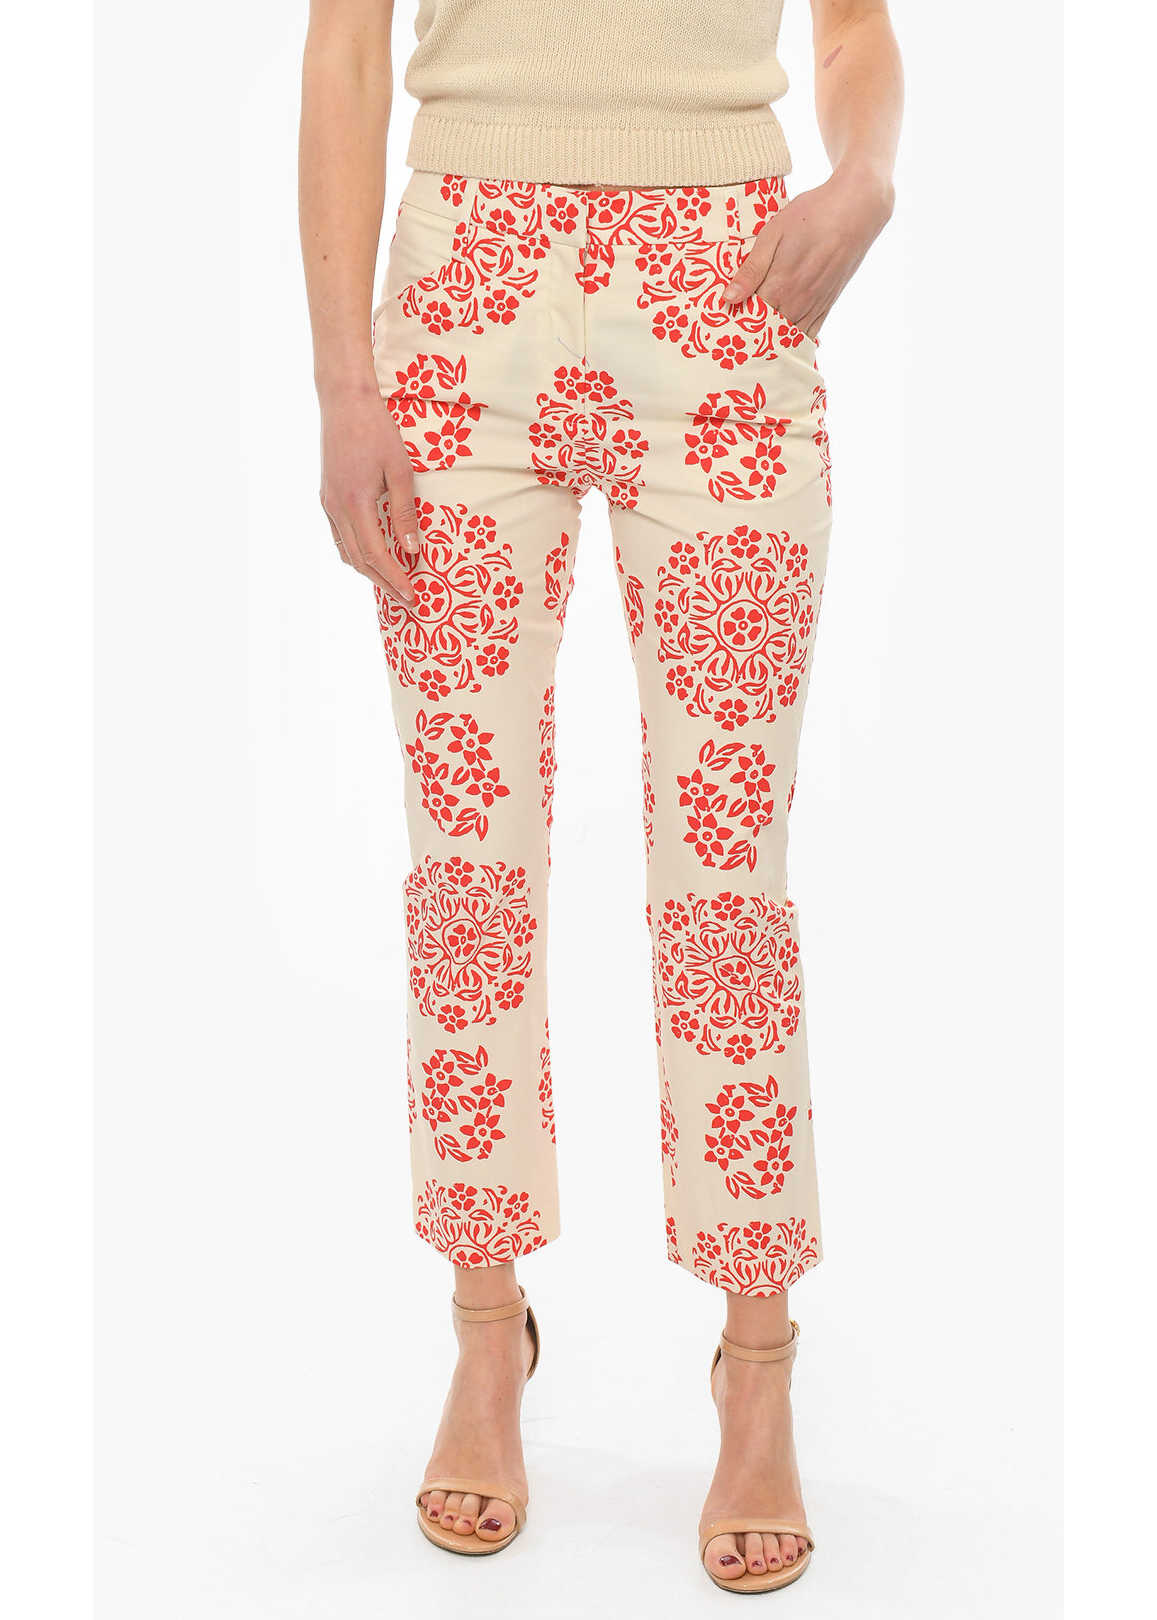 True Royal Floral Patterned Stretch Cotton Pants Red